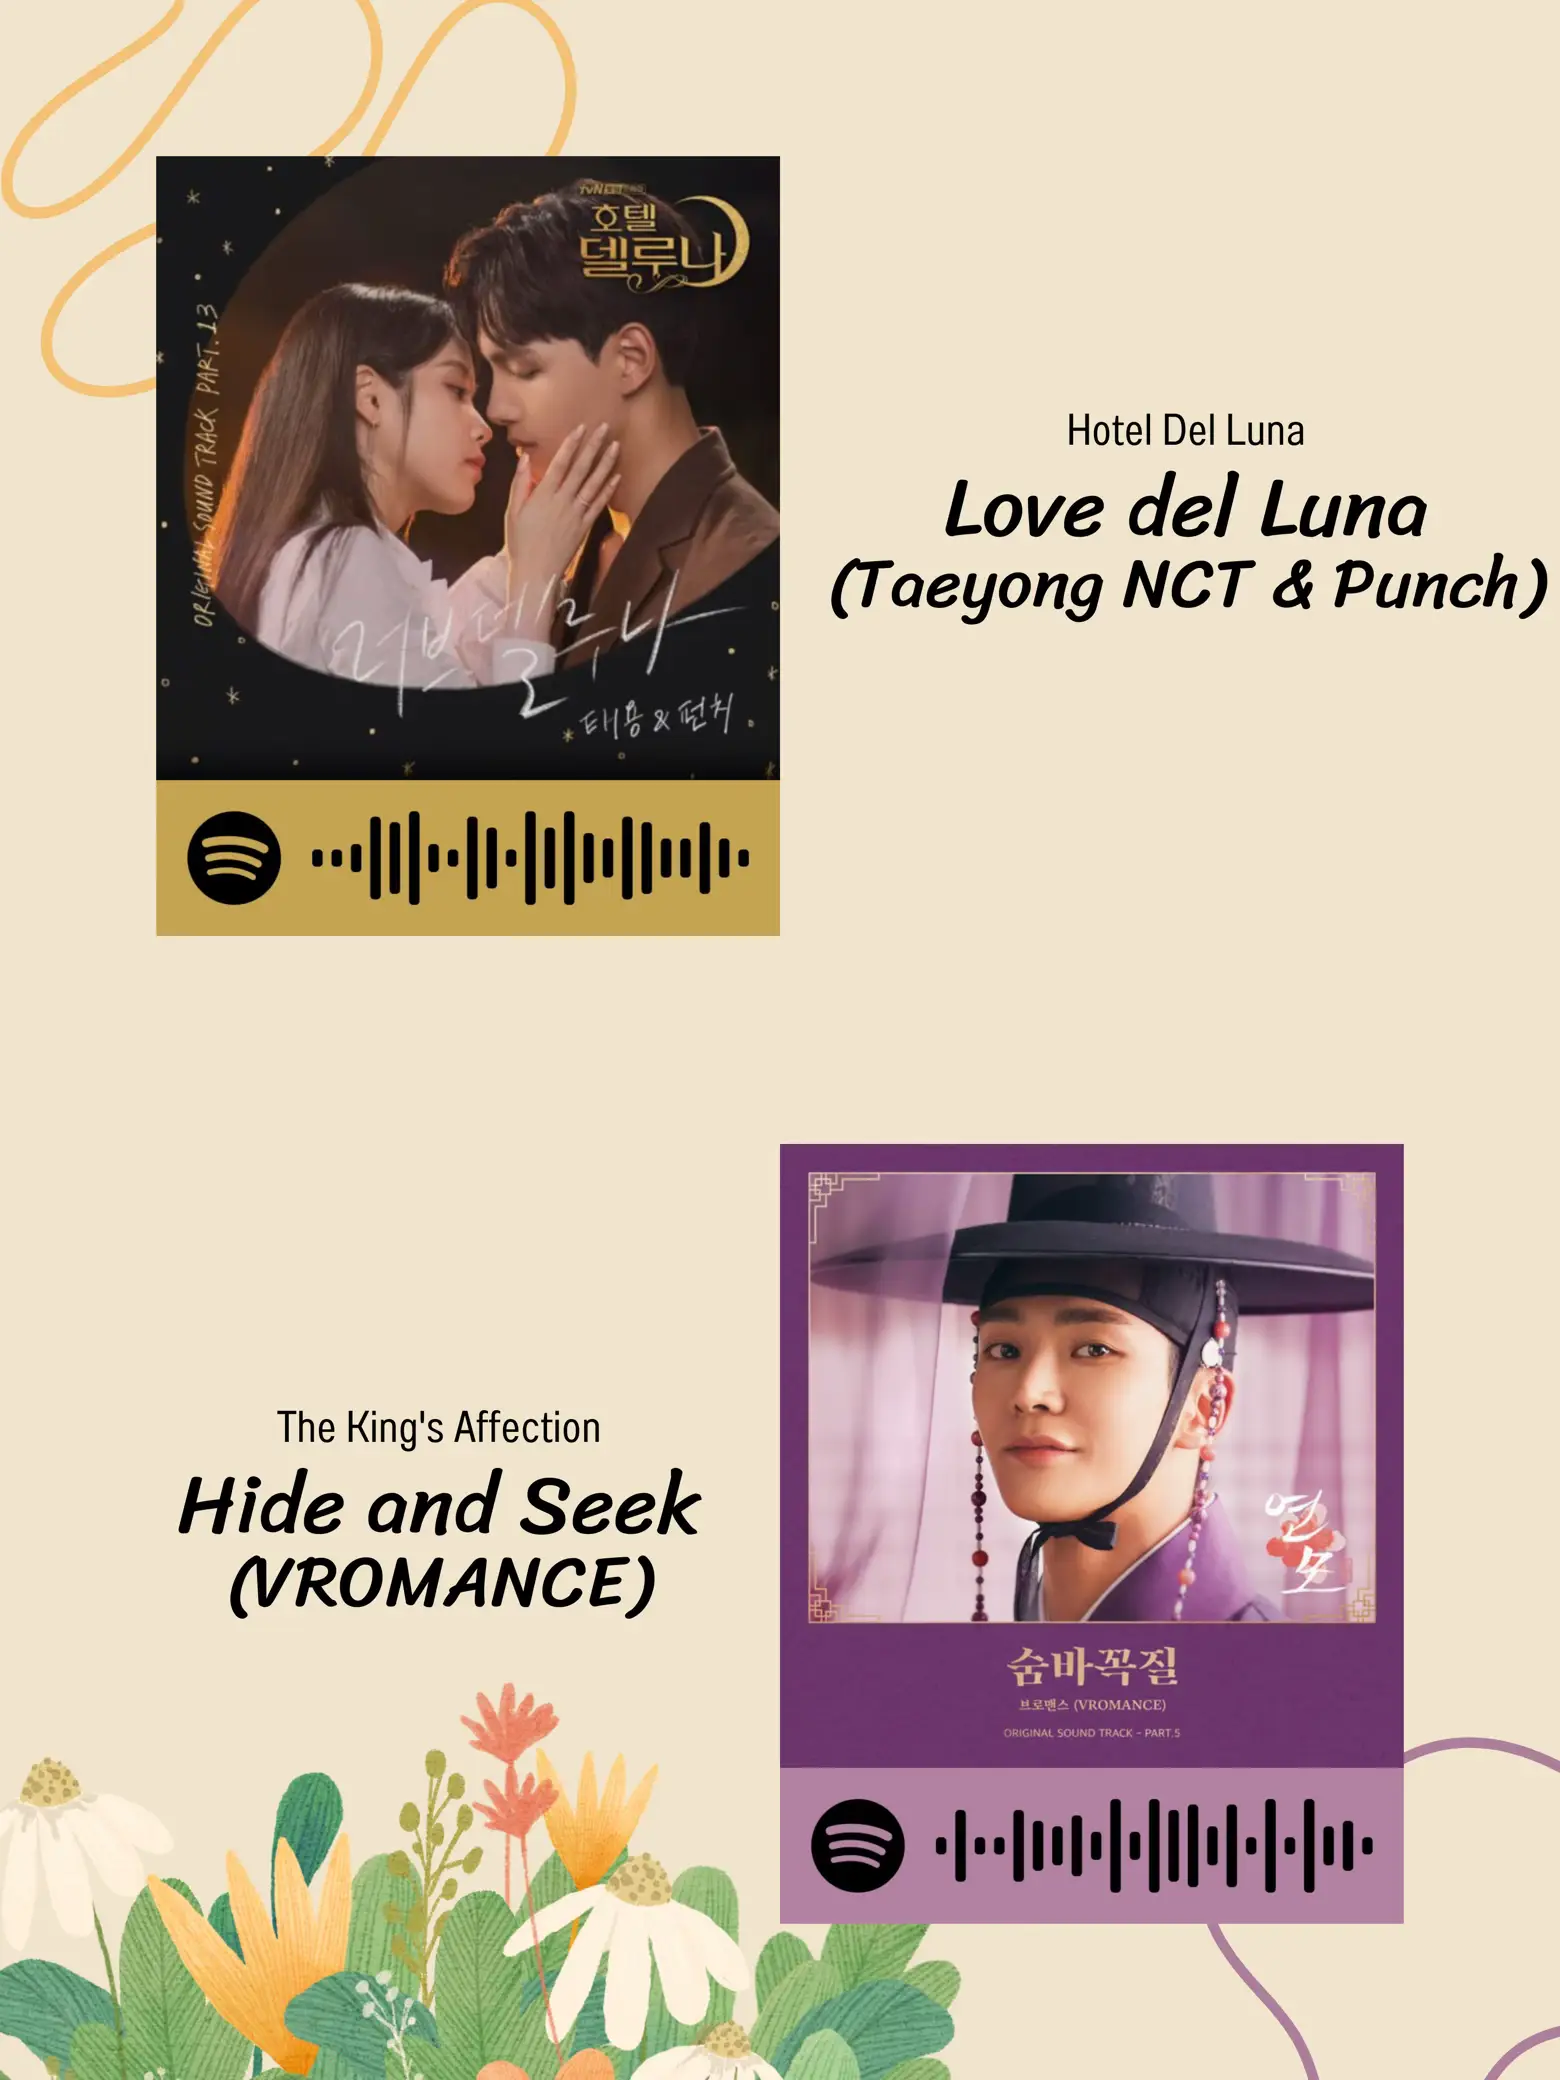 The King's Affection OST, Hide and Seek by VROMANCE is now